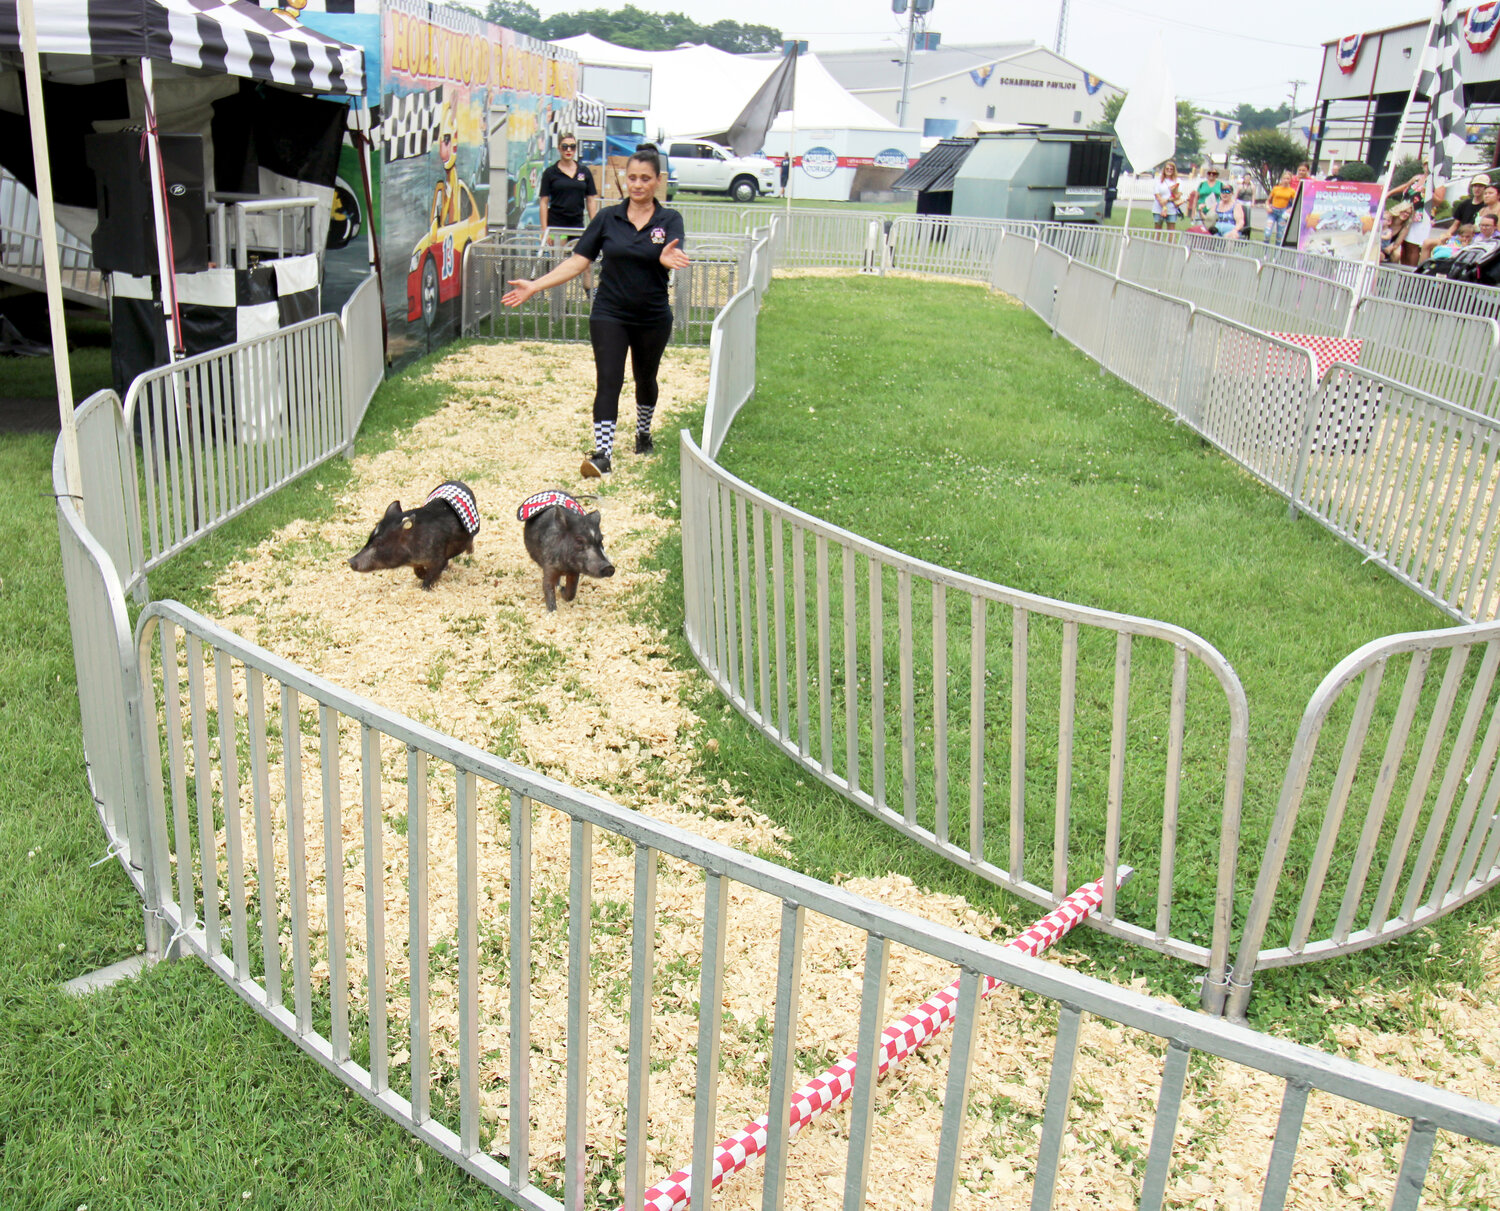 The Hollywood Racing Pigs kicked off their first race of the Delaware State Fair on Thursday afternoon. The speedy swine will race everyday during the 2023 state fair.